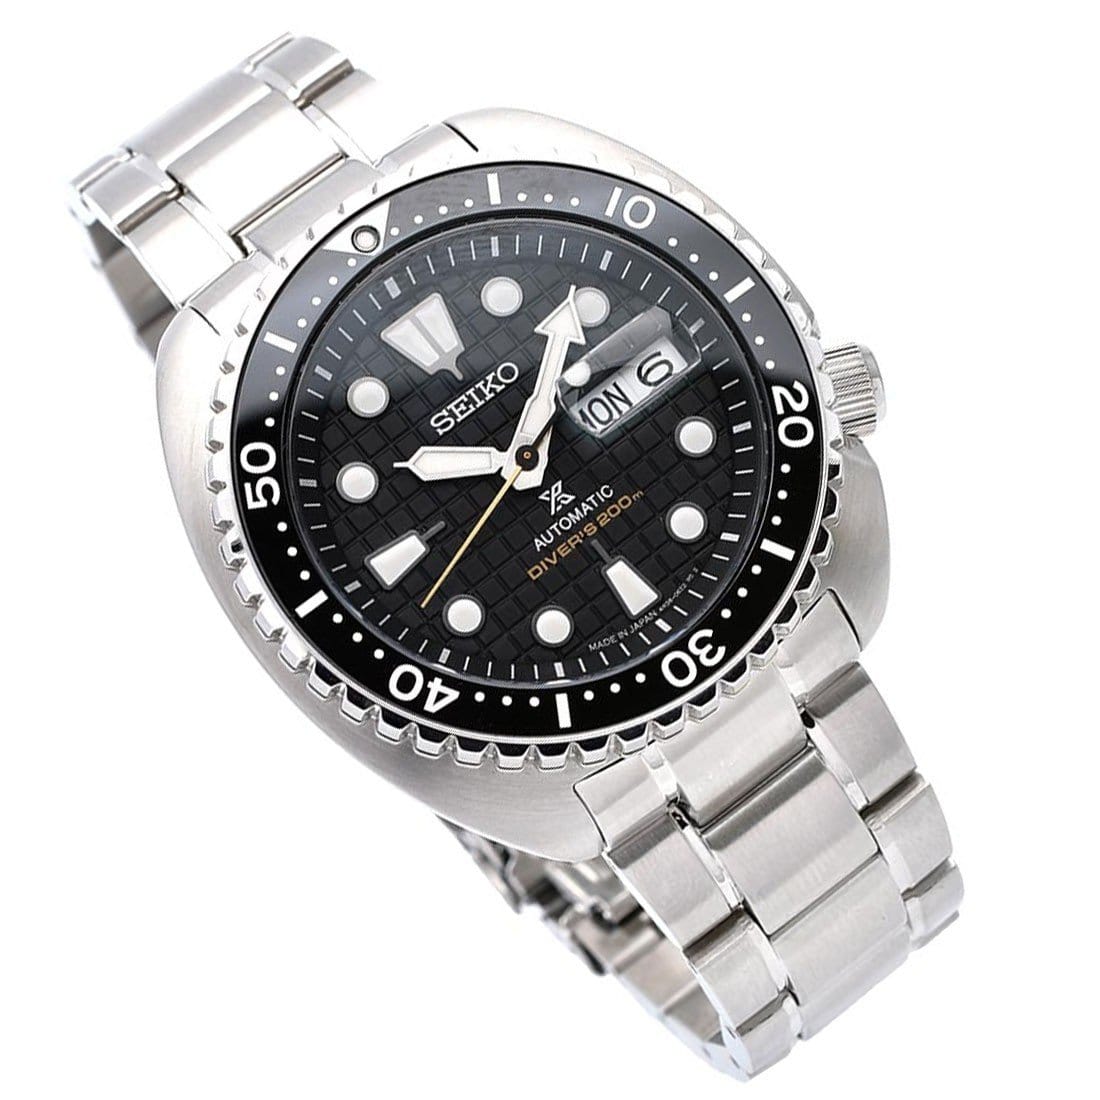 SBDY049 Seiko Prospex Turtle Automatic 200M Black Dial Male Divers Watch